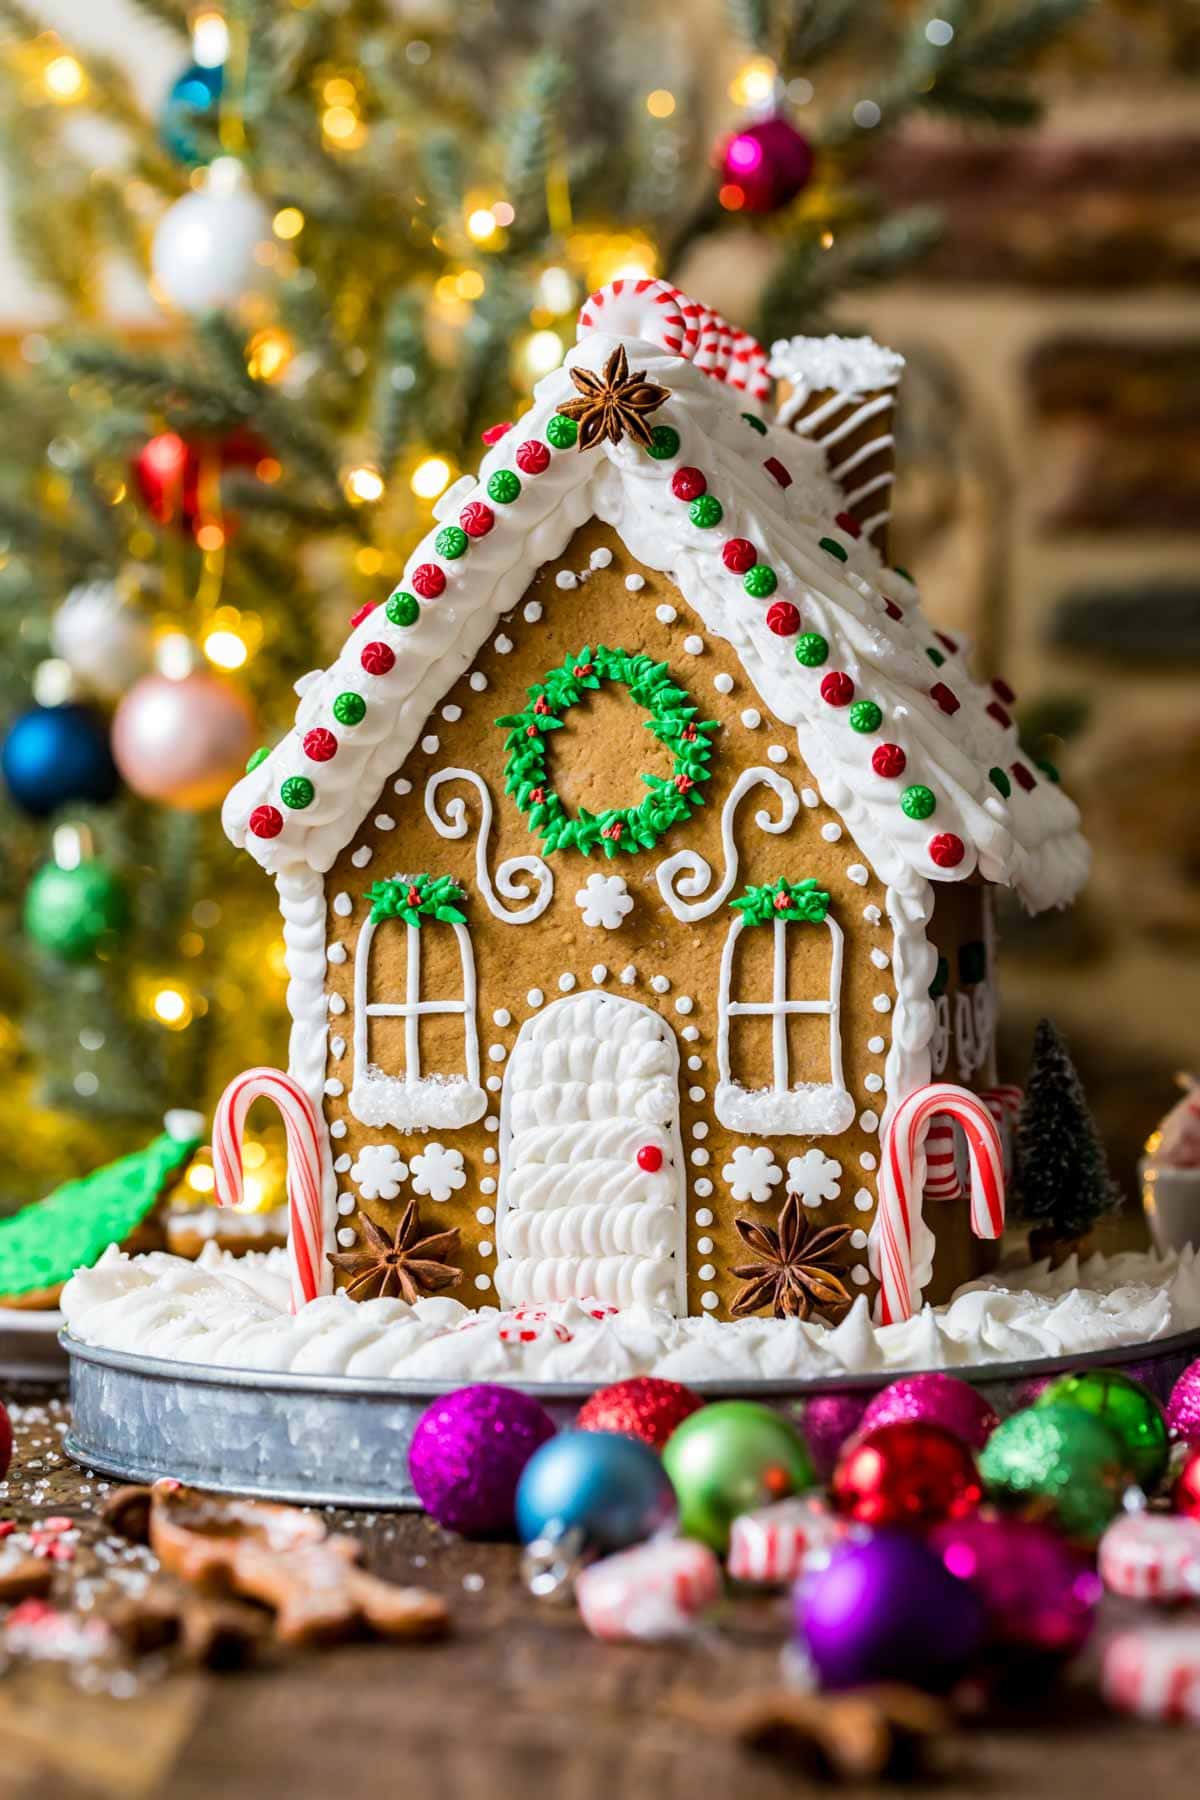 Festive gingerbread cookie house decorated with royal icing and candies.